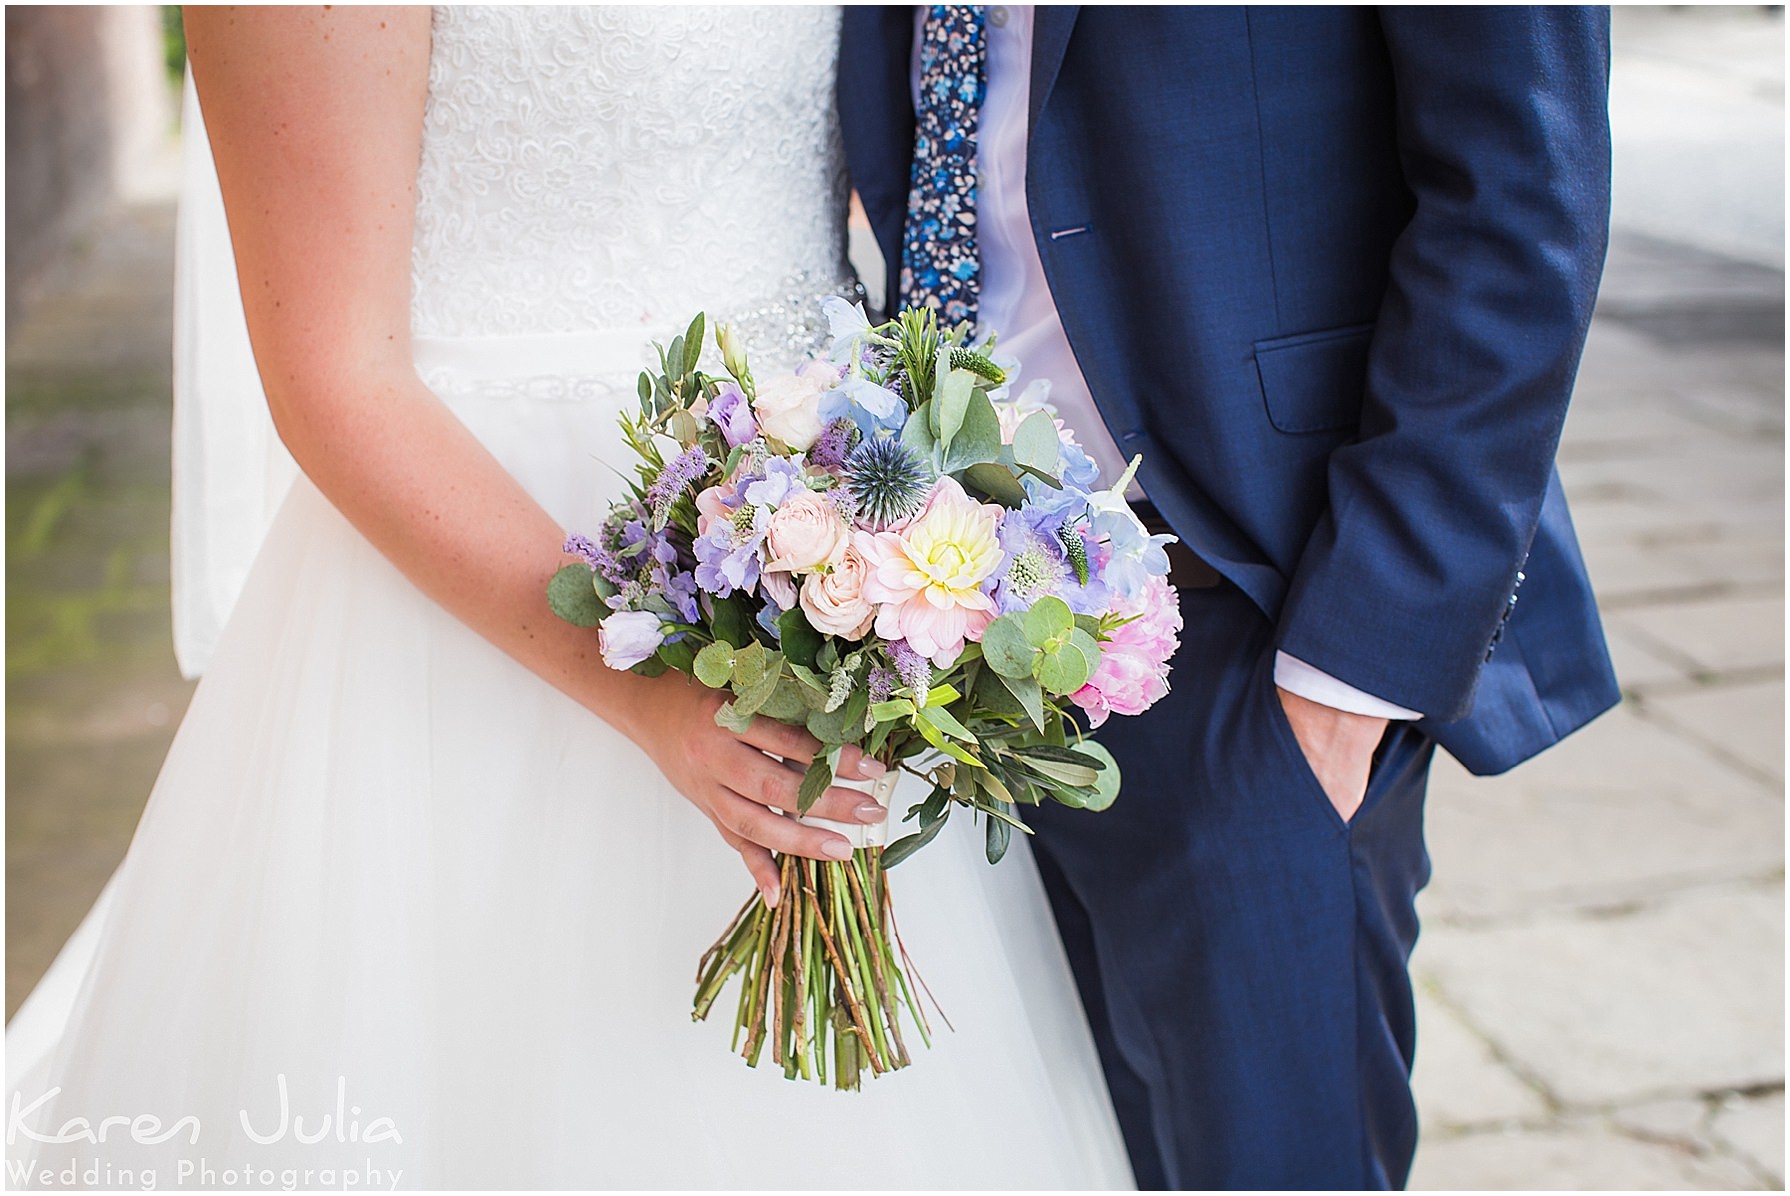 brides bouquet; a mix of pastels by from flowers